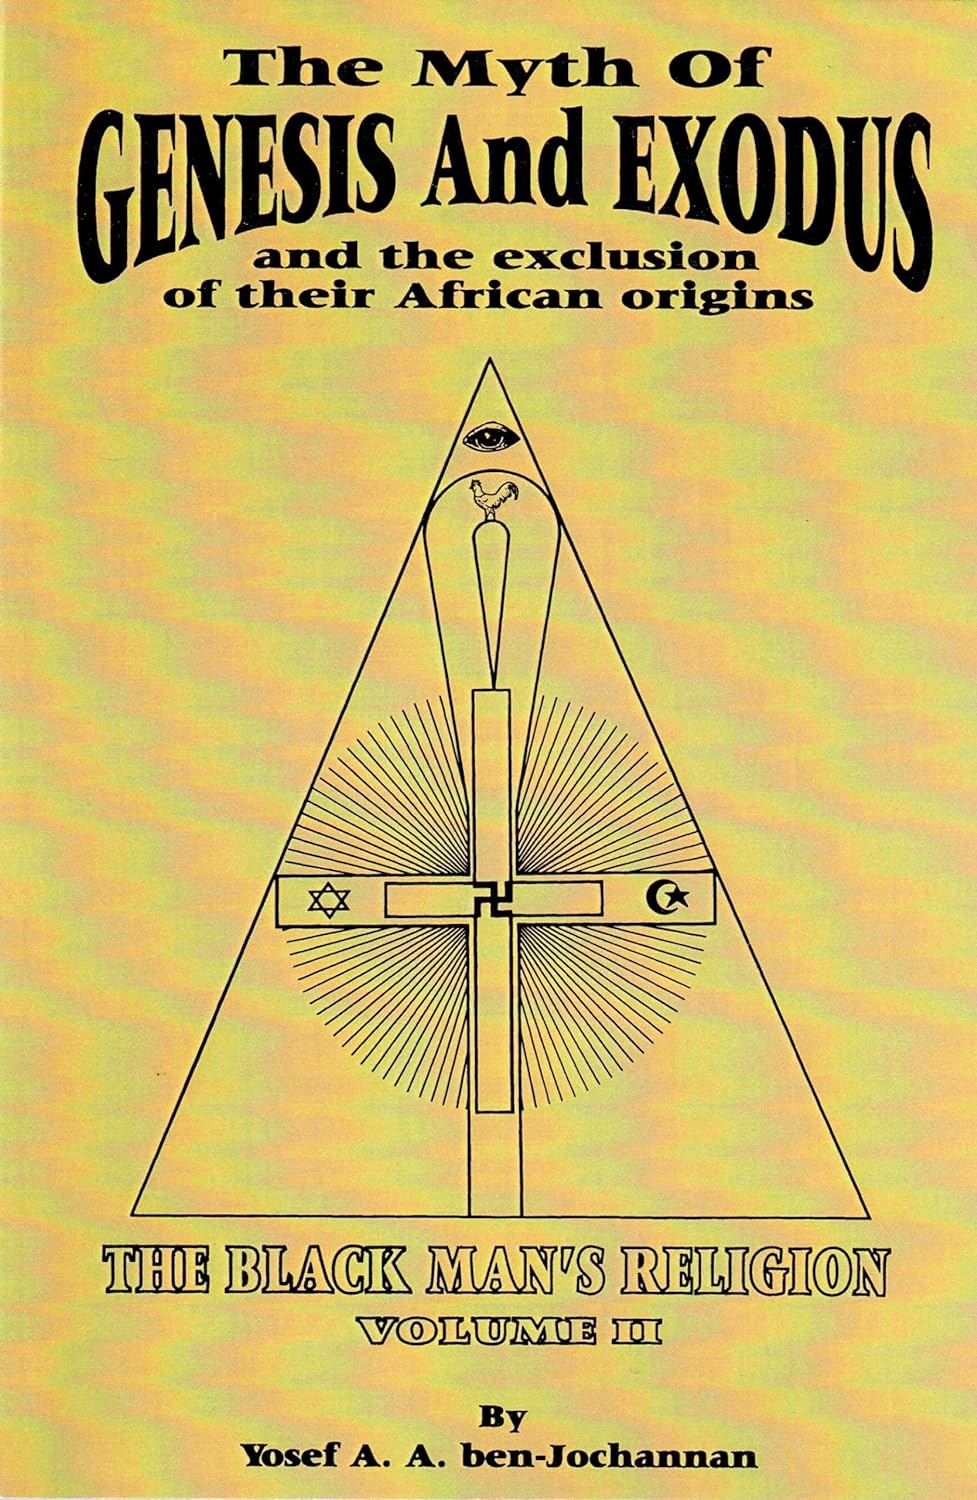 The Myth of Genesis and Exodus and the Exclusion of Their African Origins by Yosef A.A. ben-Jochannan